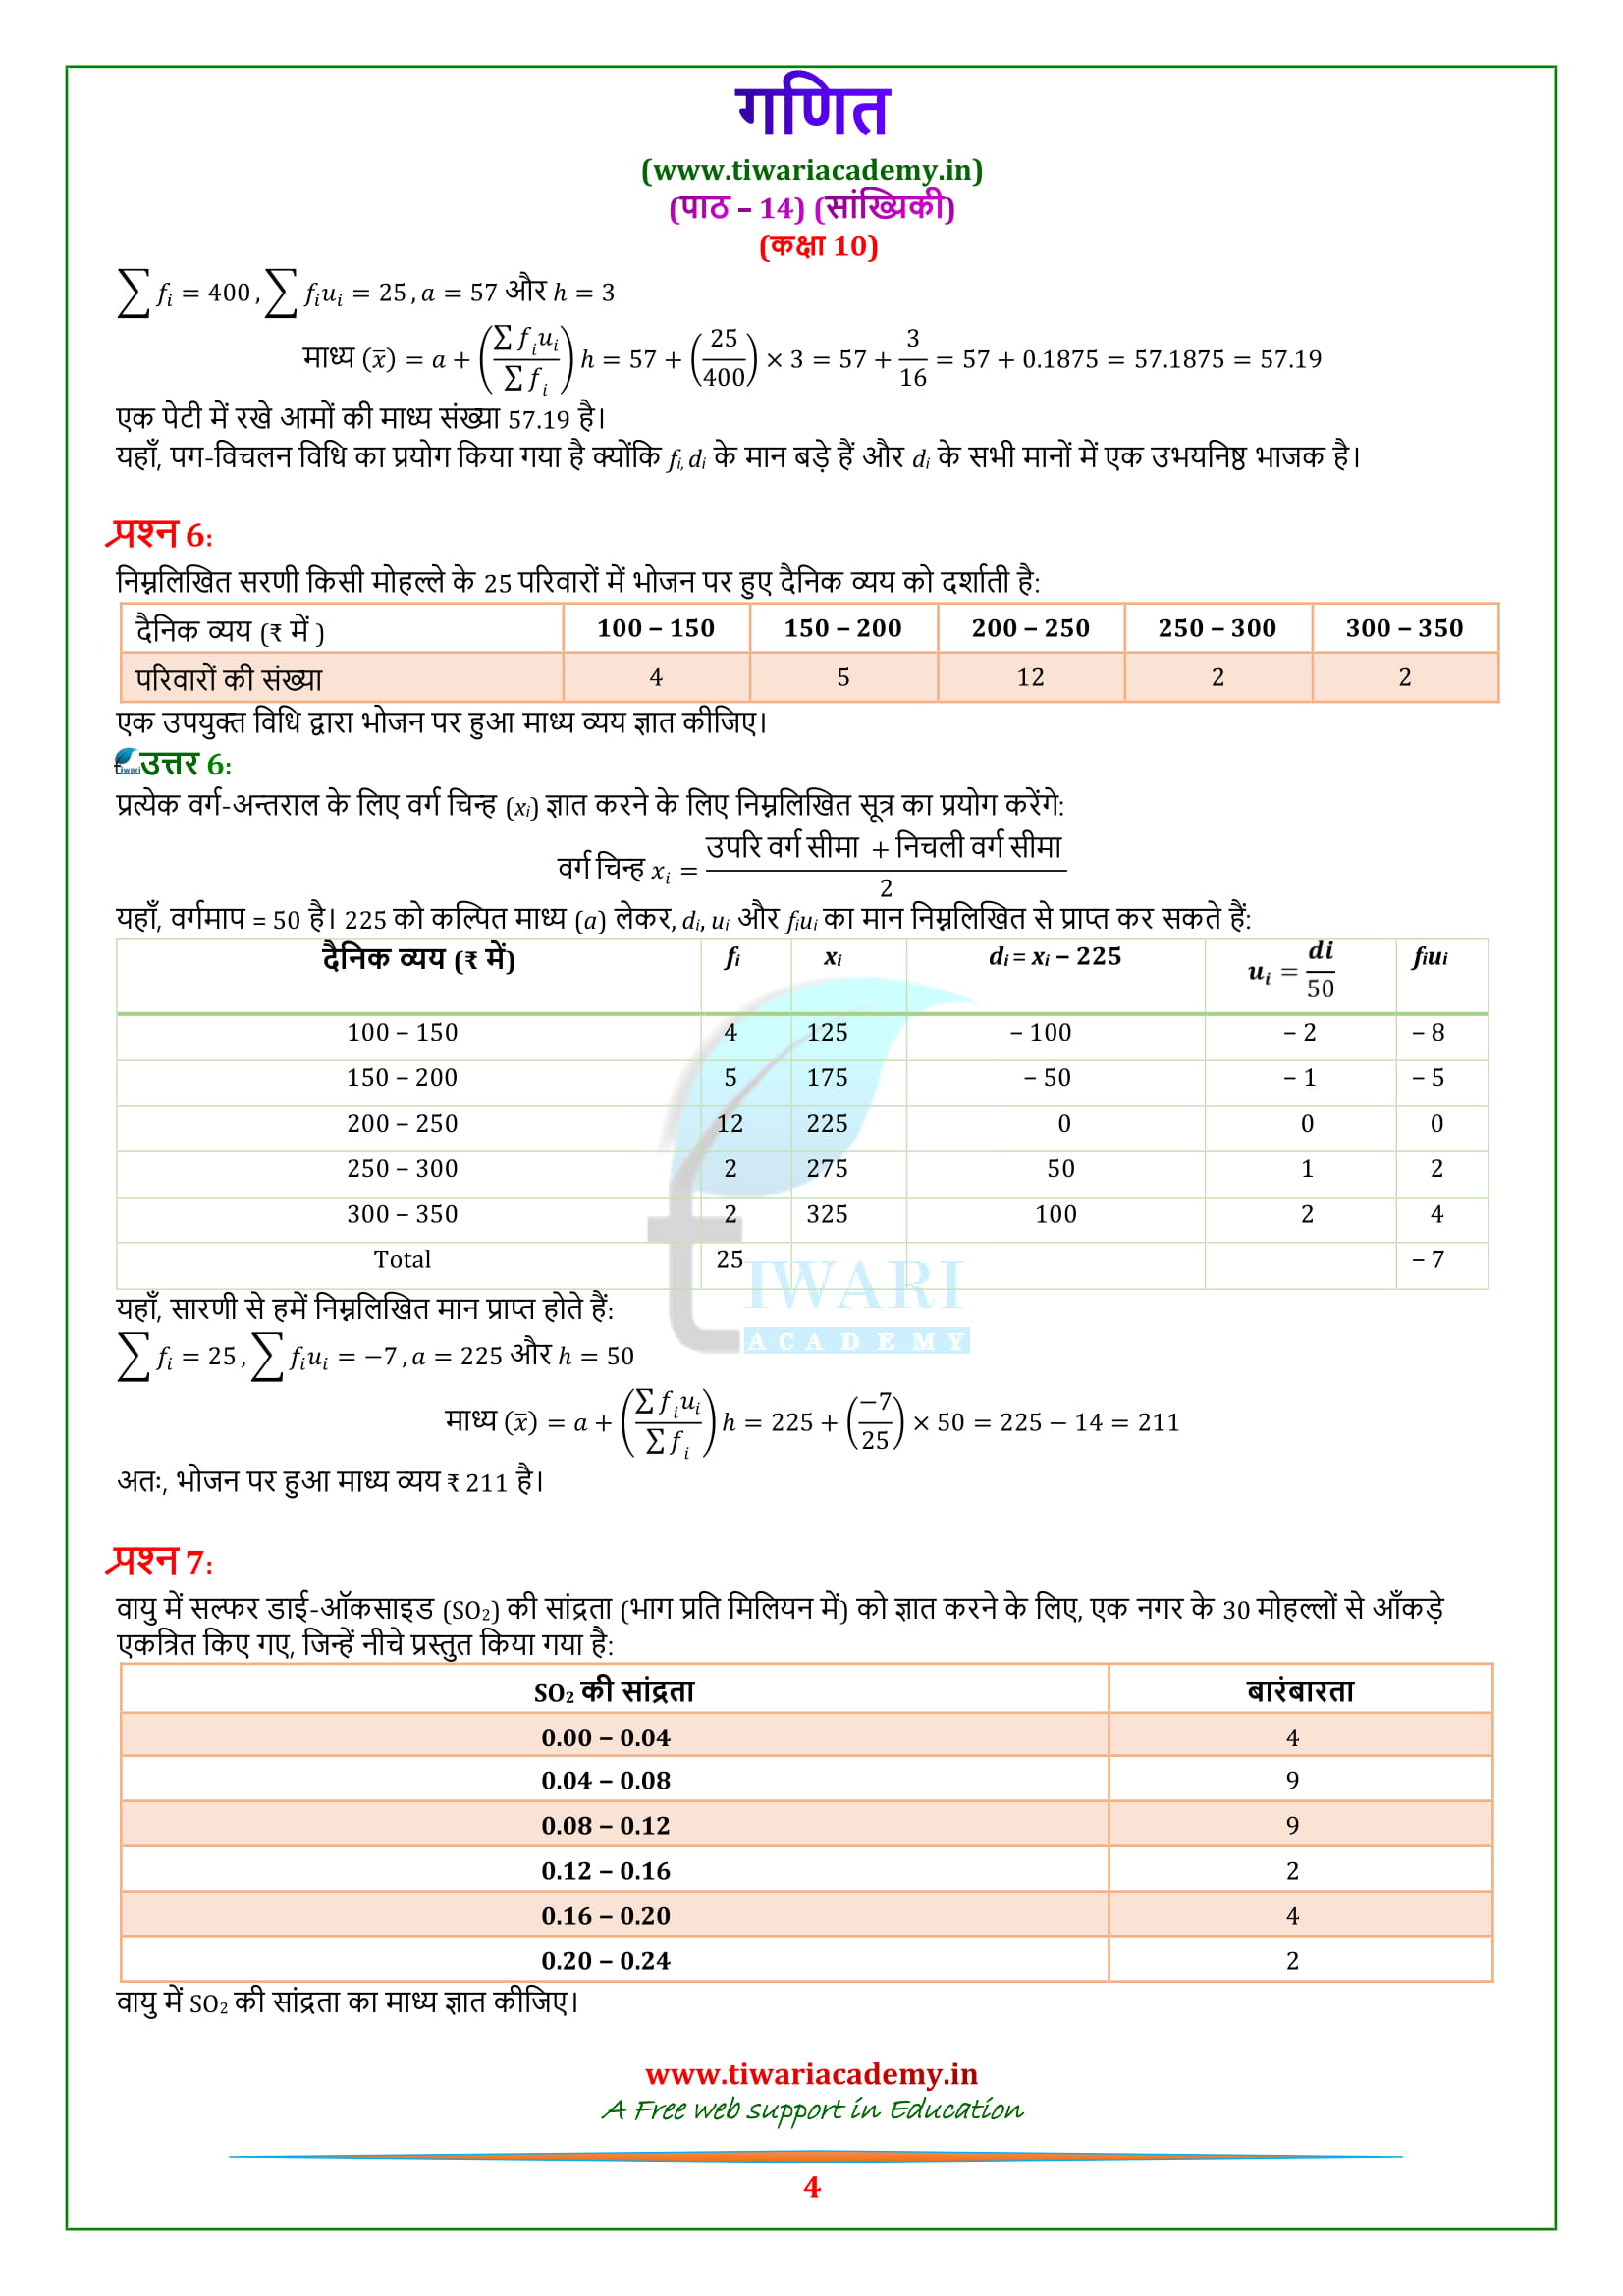 10 Maths Exercise 14.1 Solutions free for all students in hindi